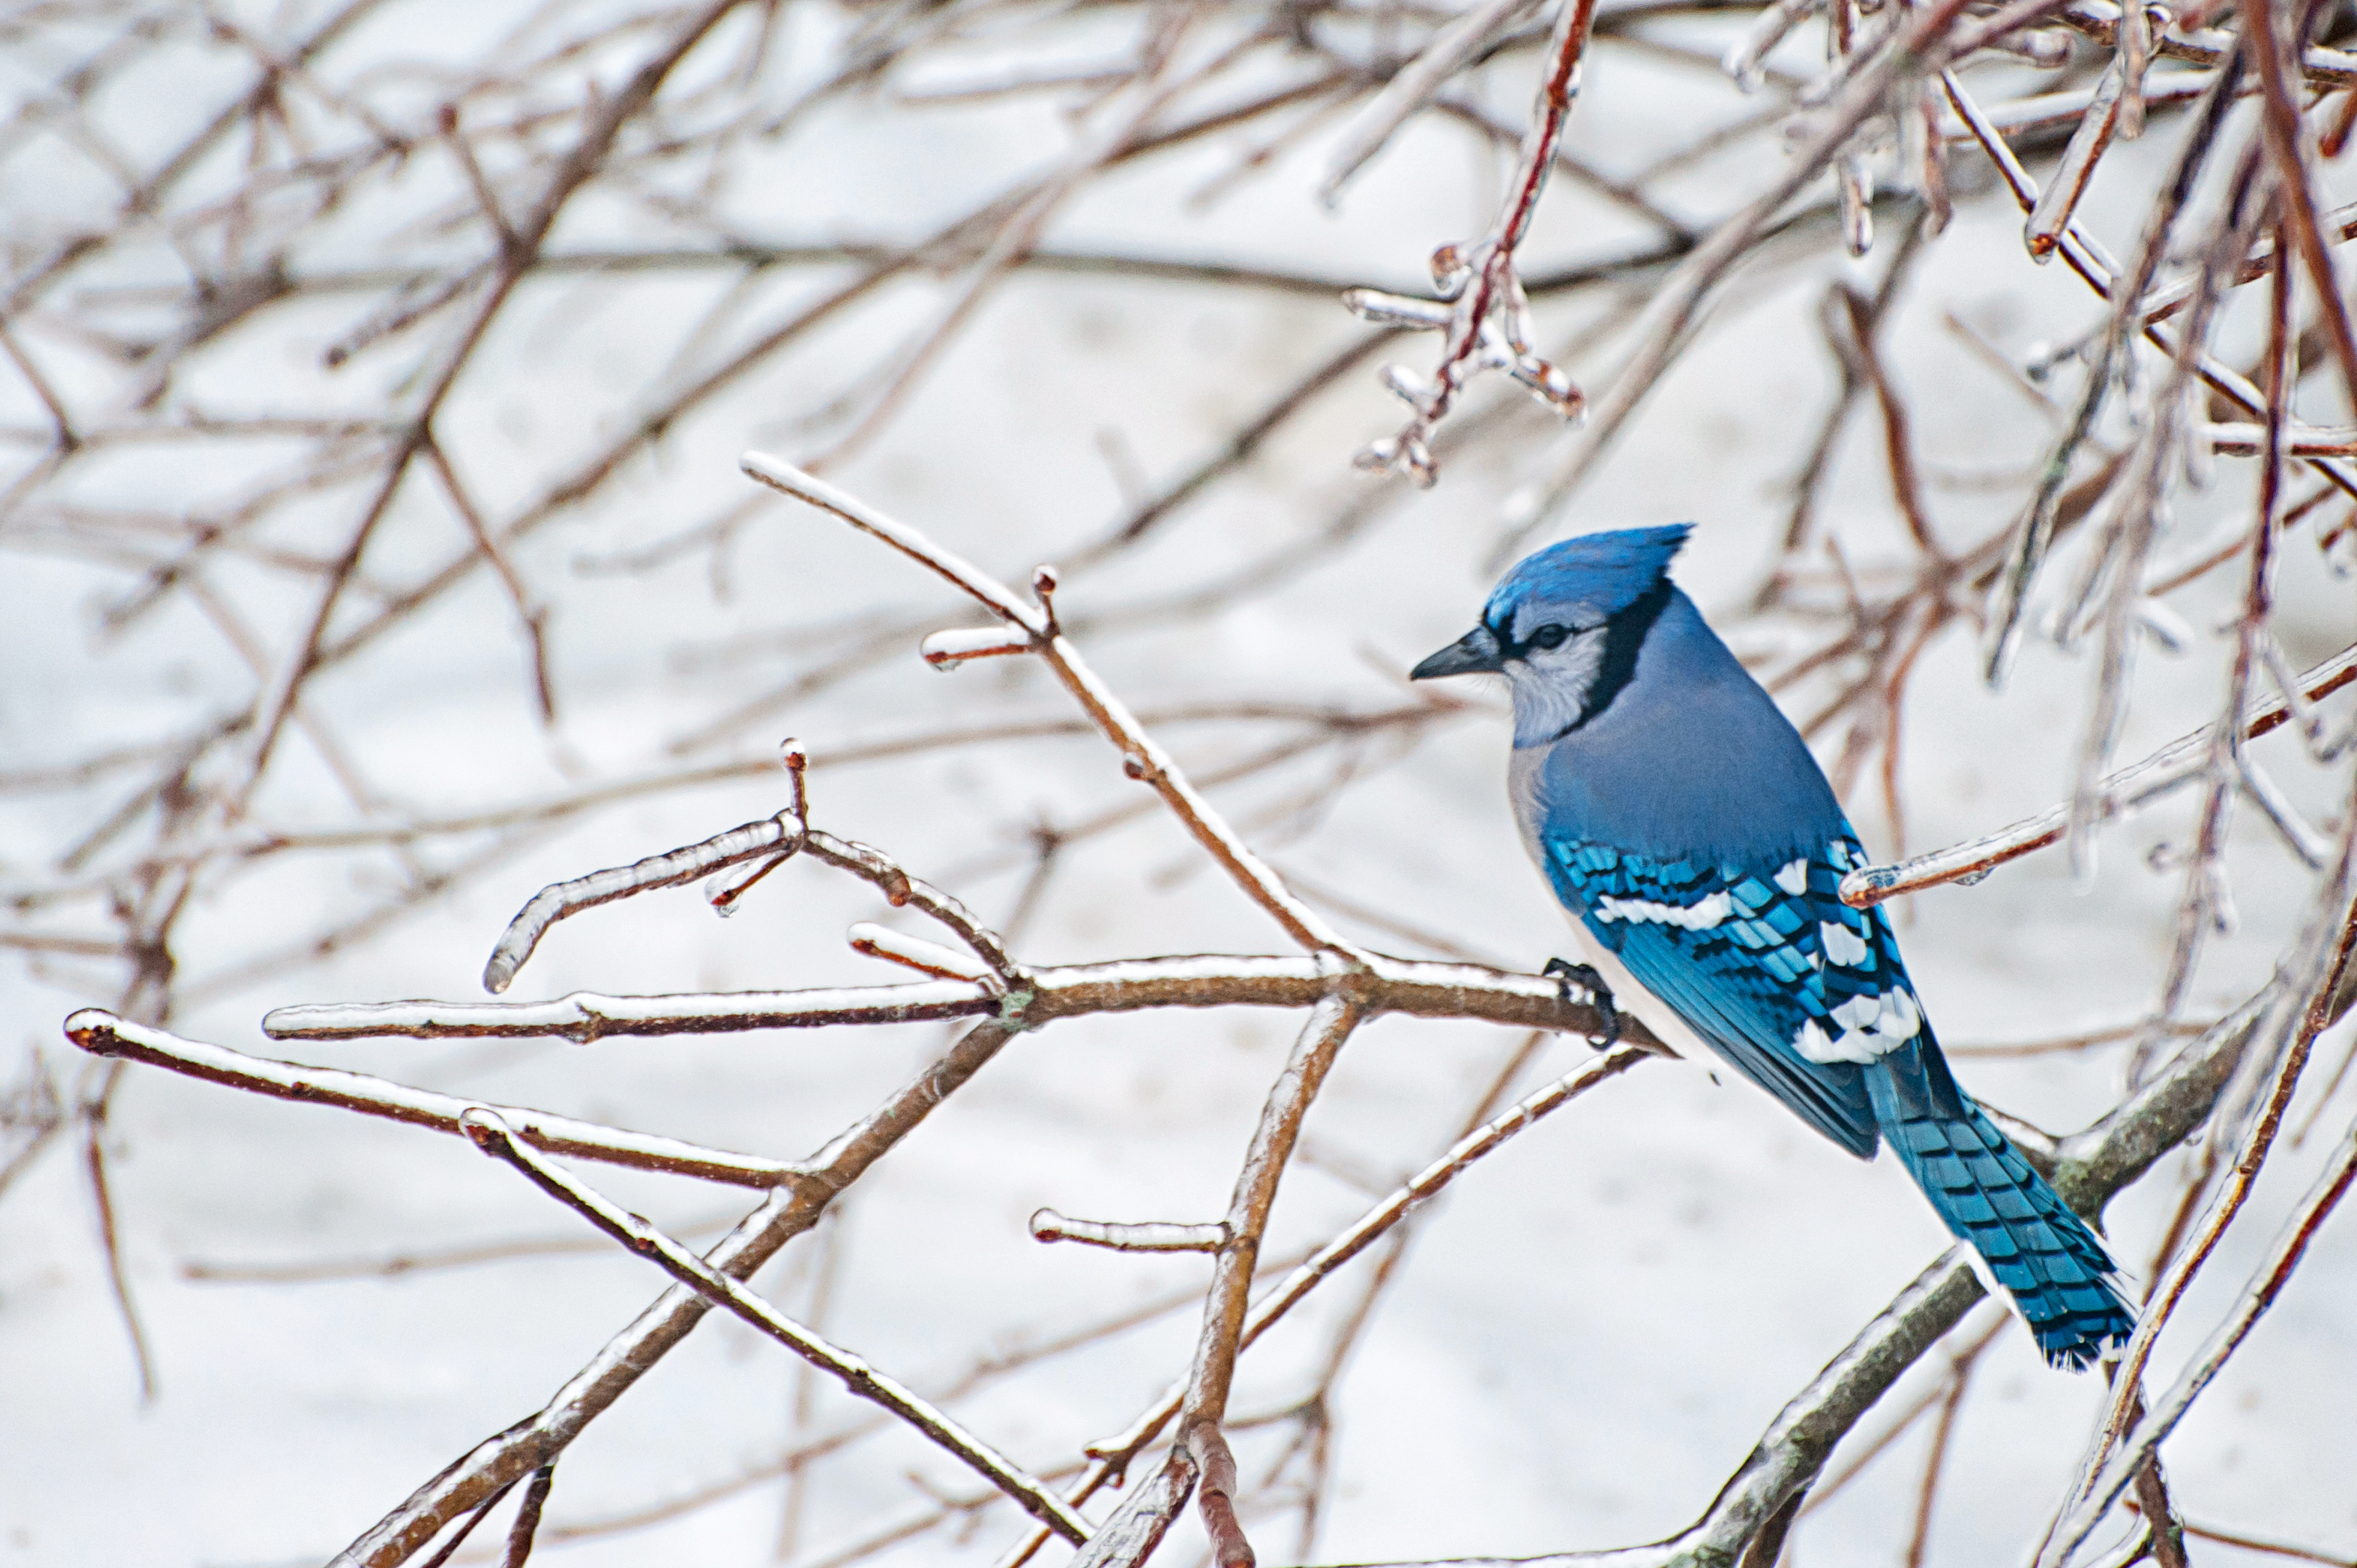 Feeding birds in winter – the dos and don'ts